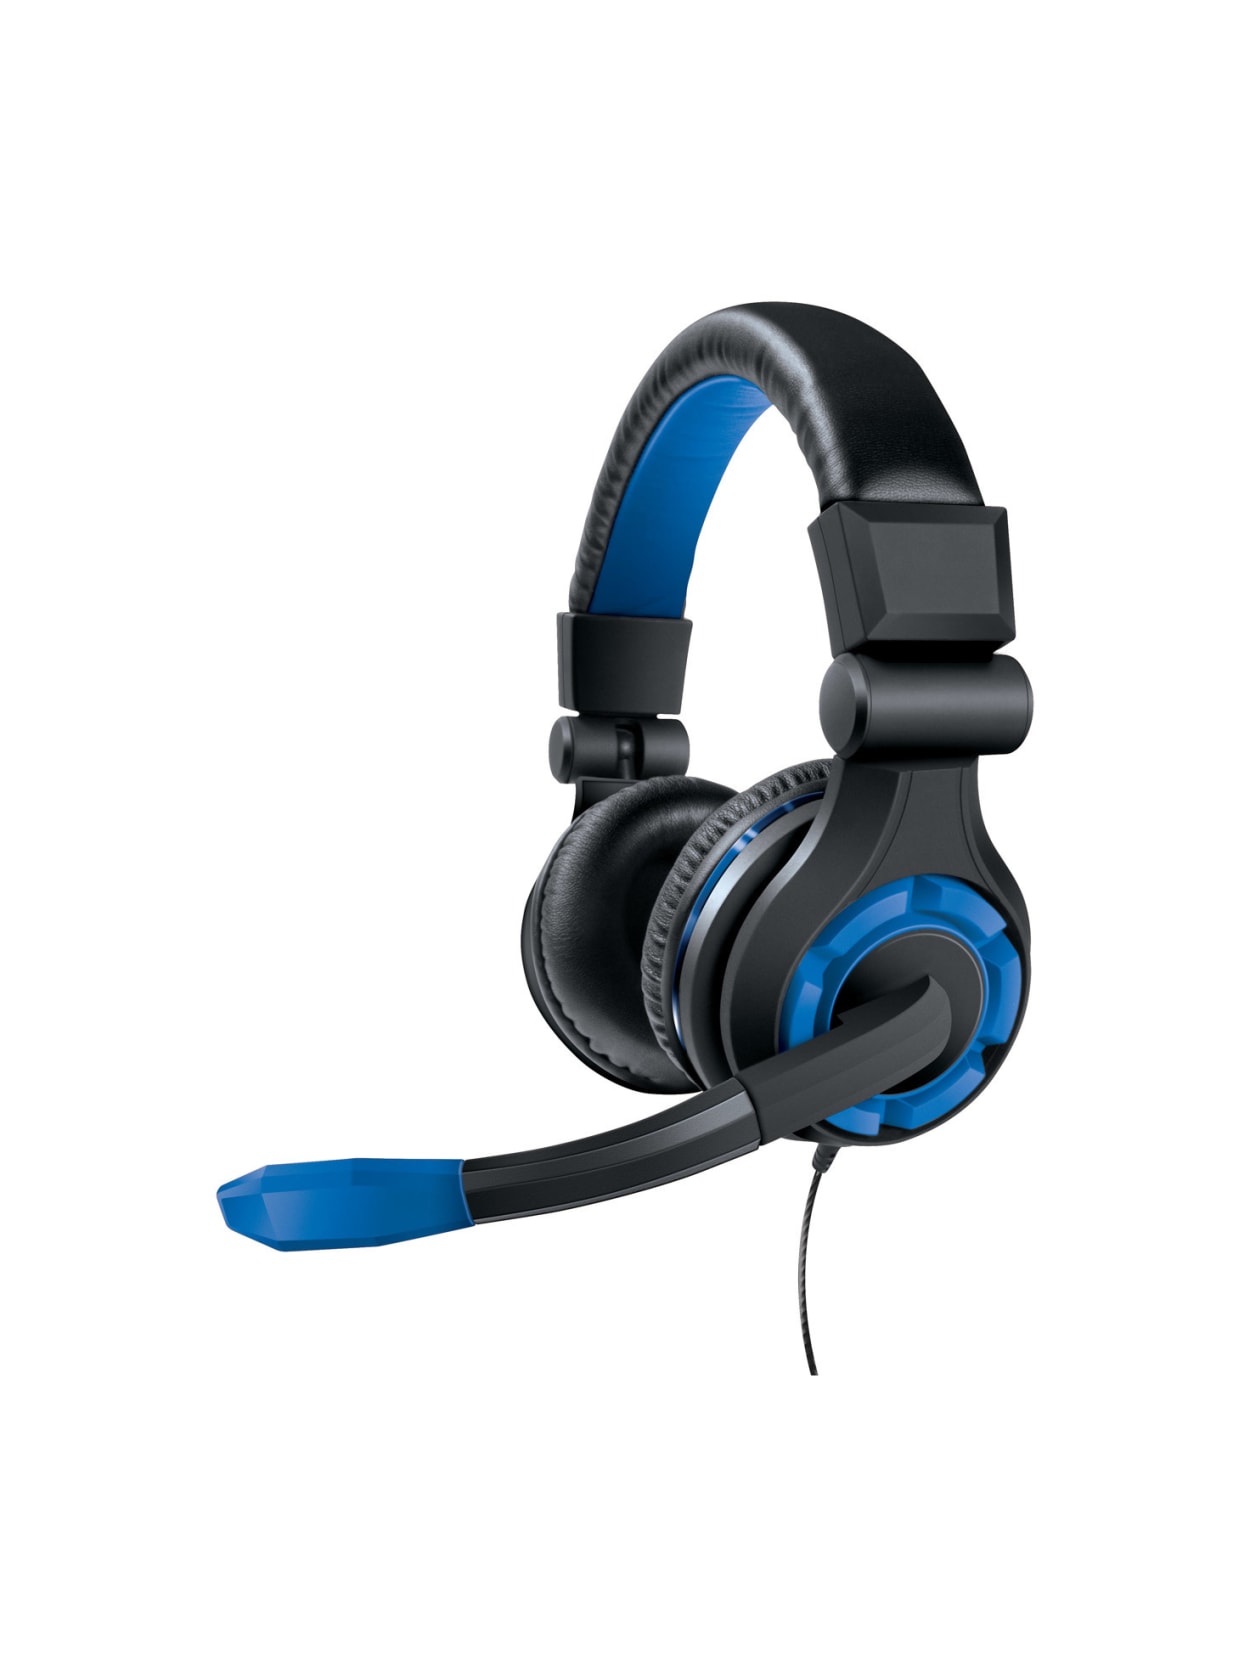 ps4 headset next day delivery